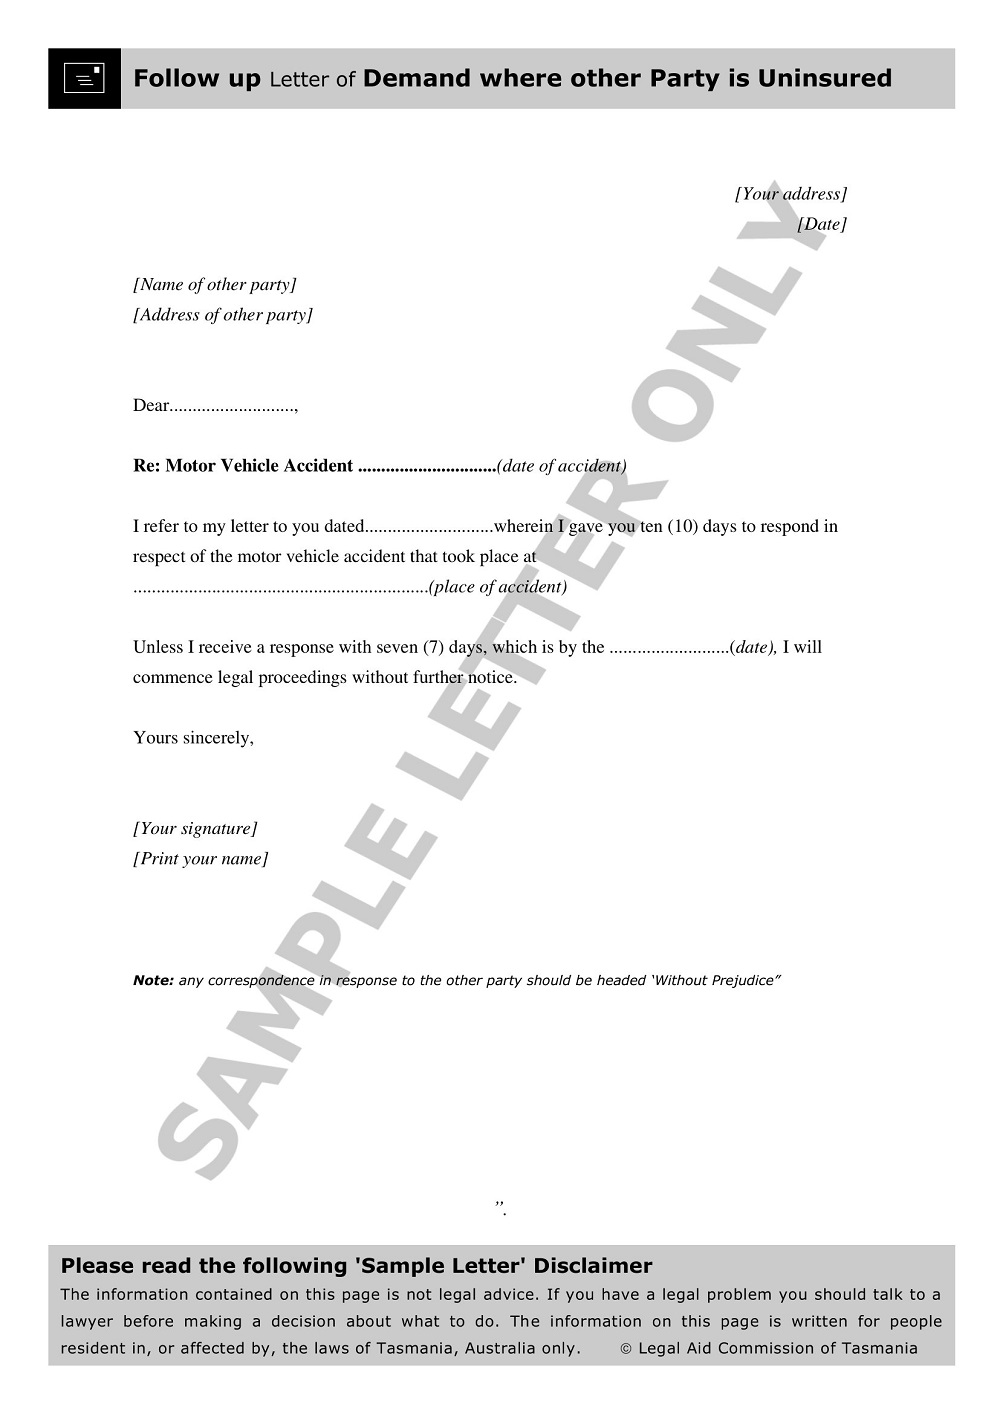 Follow-Up Letter on Demand Template